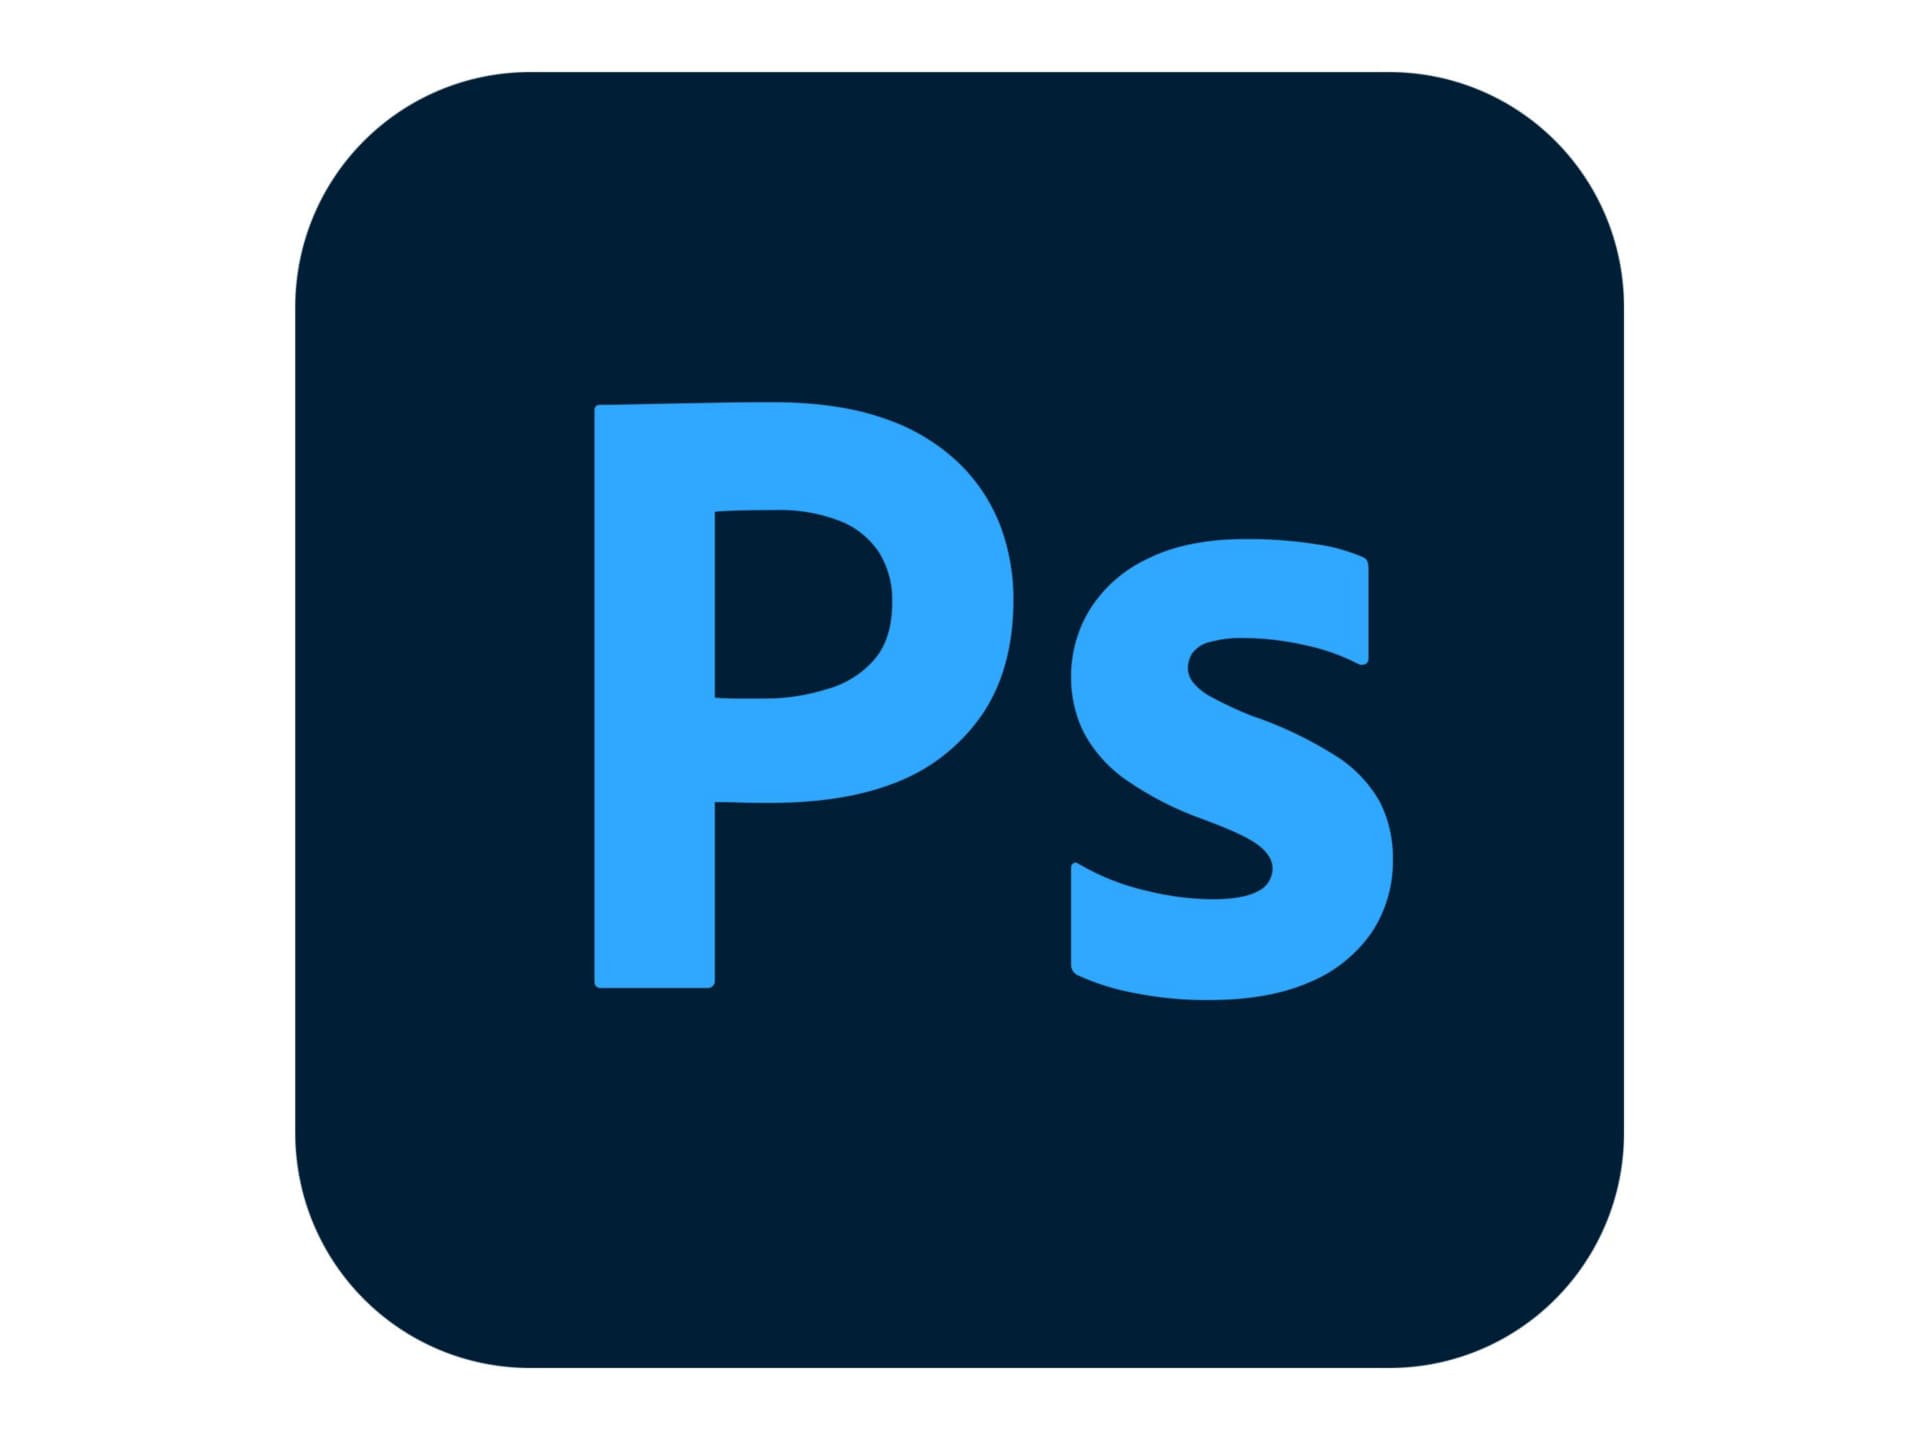 Adobe Photoshop CC for teams - Subscription New (3 months) - 1 named user